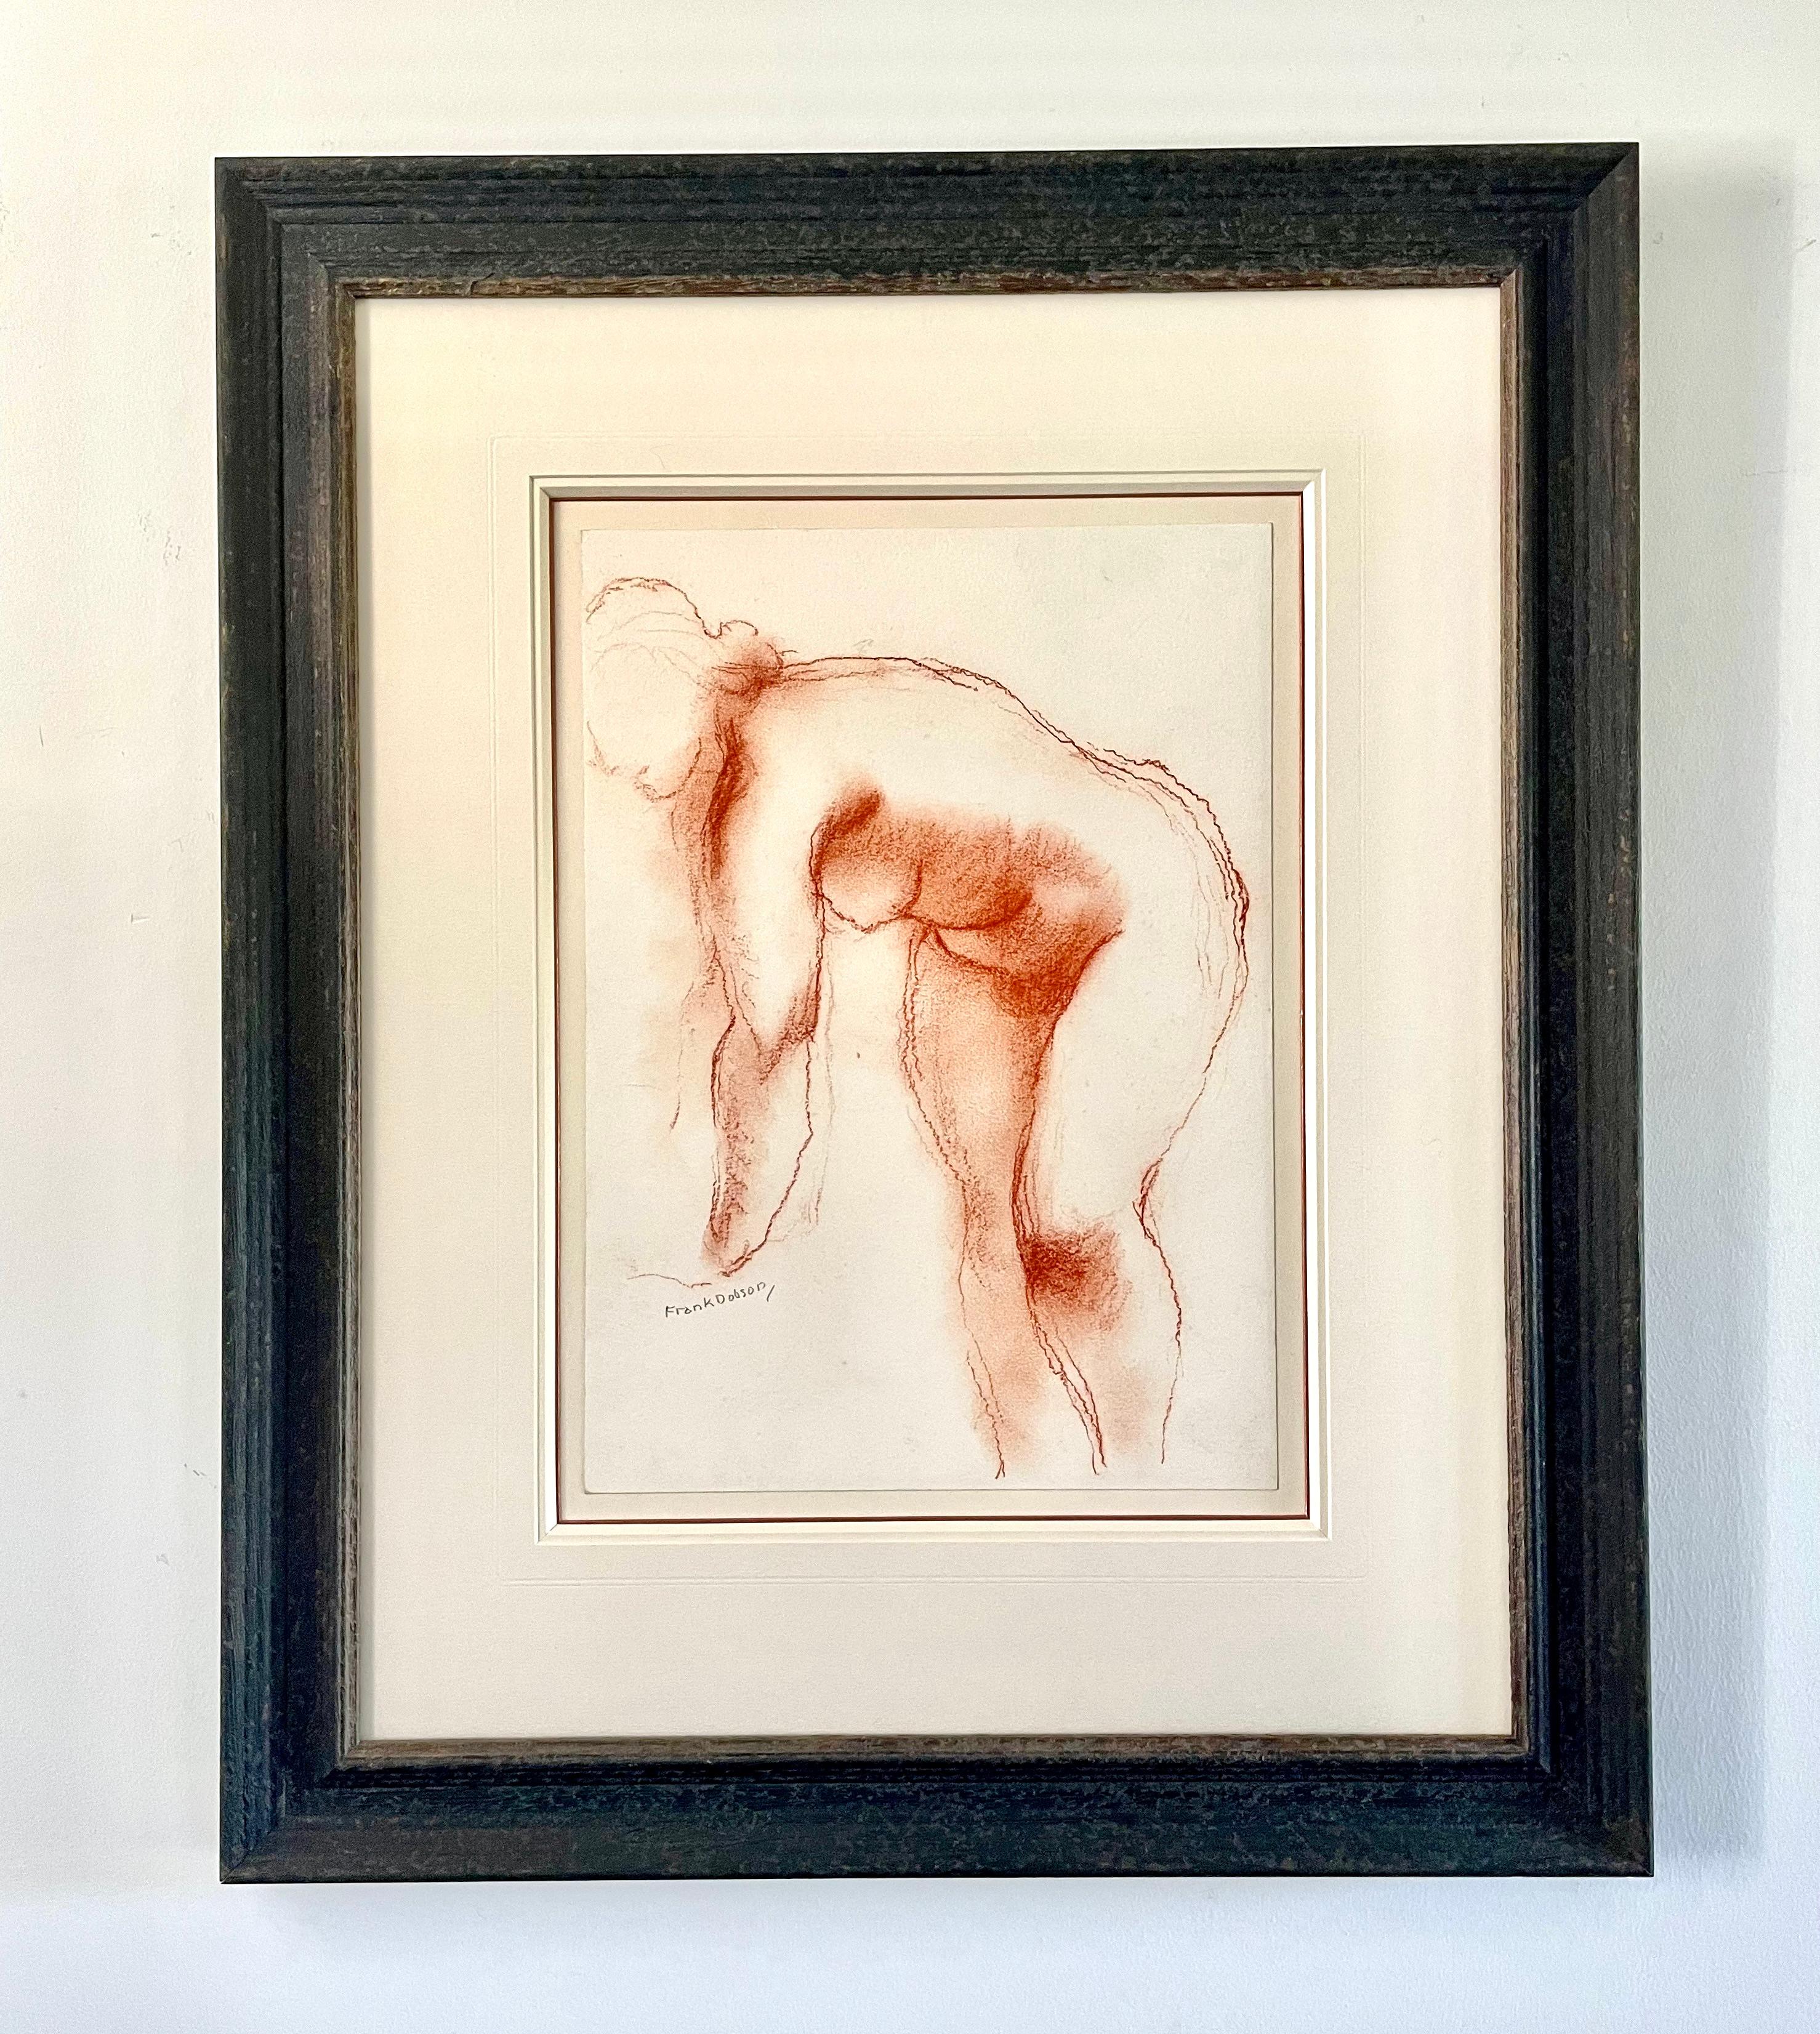 FRANK DOBSON, R.A.
(1886-1963)

Nude

Signed l.l.:  Frank Dobson
Red chalk
Framed

35.5 by 25.5 cm., 14 by 10 in.
(frame size 62 by 51 cm., 24 ½ by 20 in.)

Provenance:
Collection of Peter Ward-Jackson, curator of the Victoria & Albert Museum,